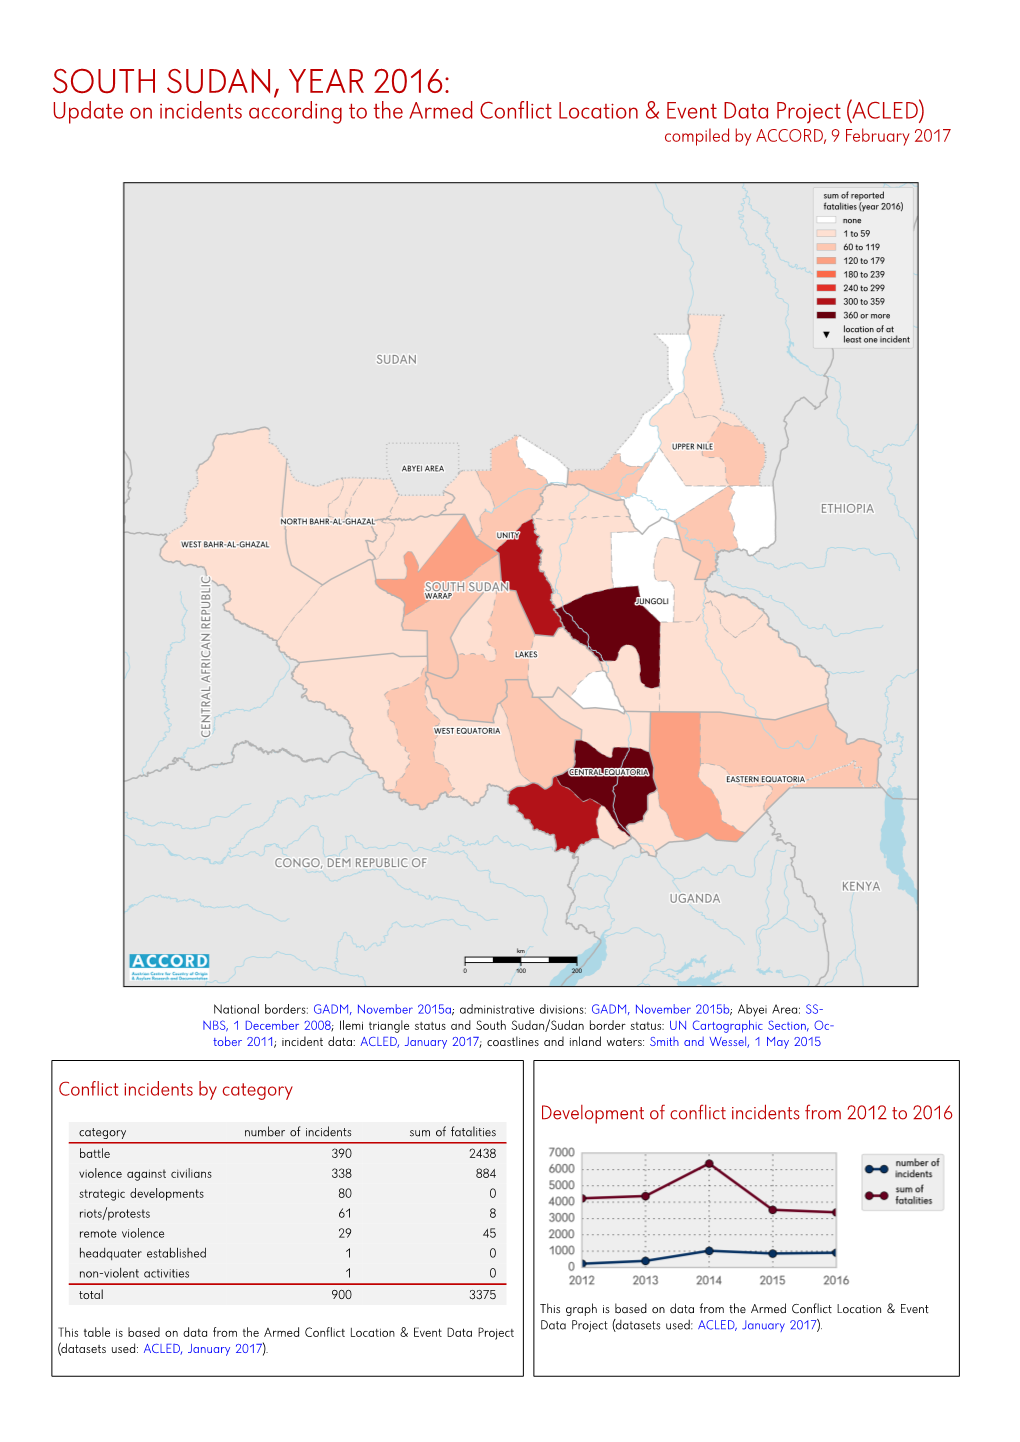 SOUTH SUDAN, YEAR 2016: Update on Incidents According to the Armed Conflict Location & Event Data Project (ACLED) Compiled by ACCORD, 9 February 2017